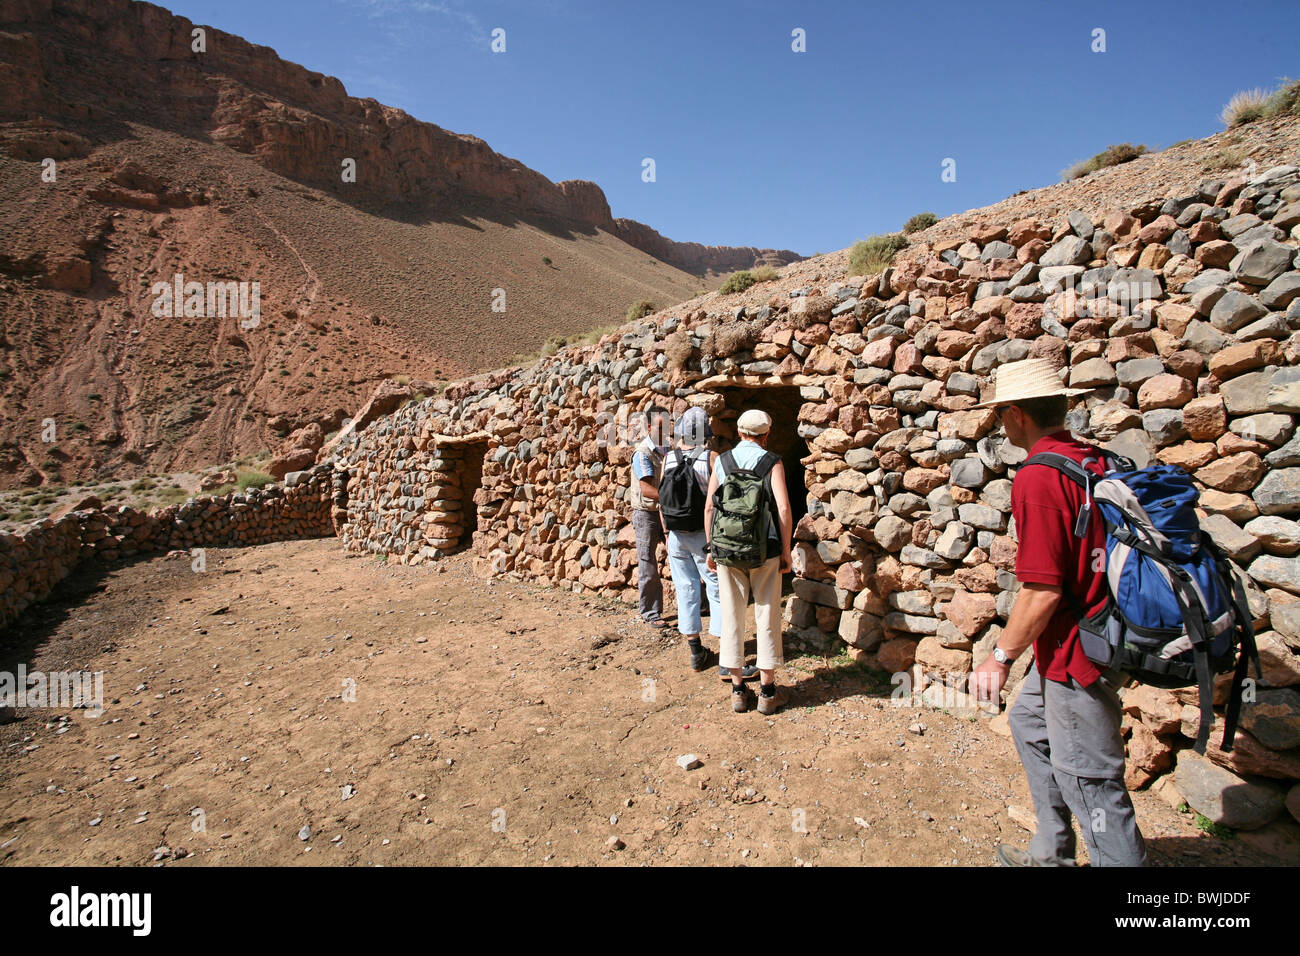 nomad settlement nomad stone house stone building tourist Dades valley Gorge Morocco Africa North Africa Stock Photo